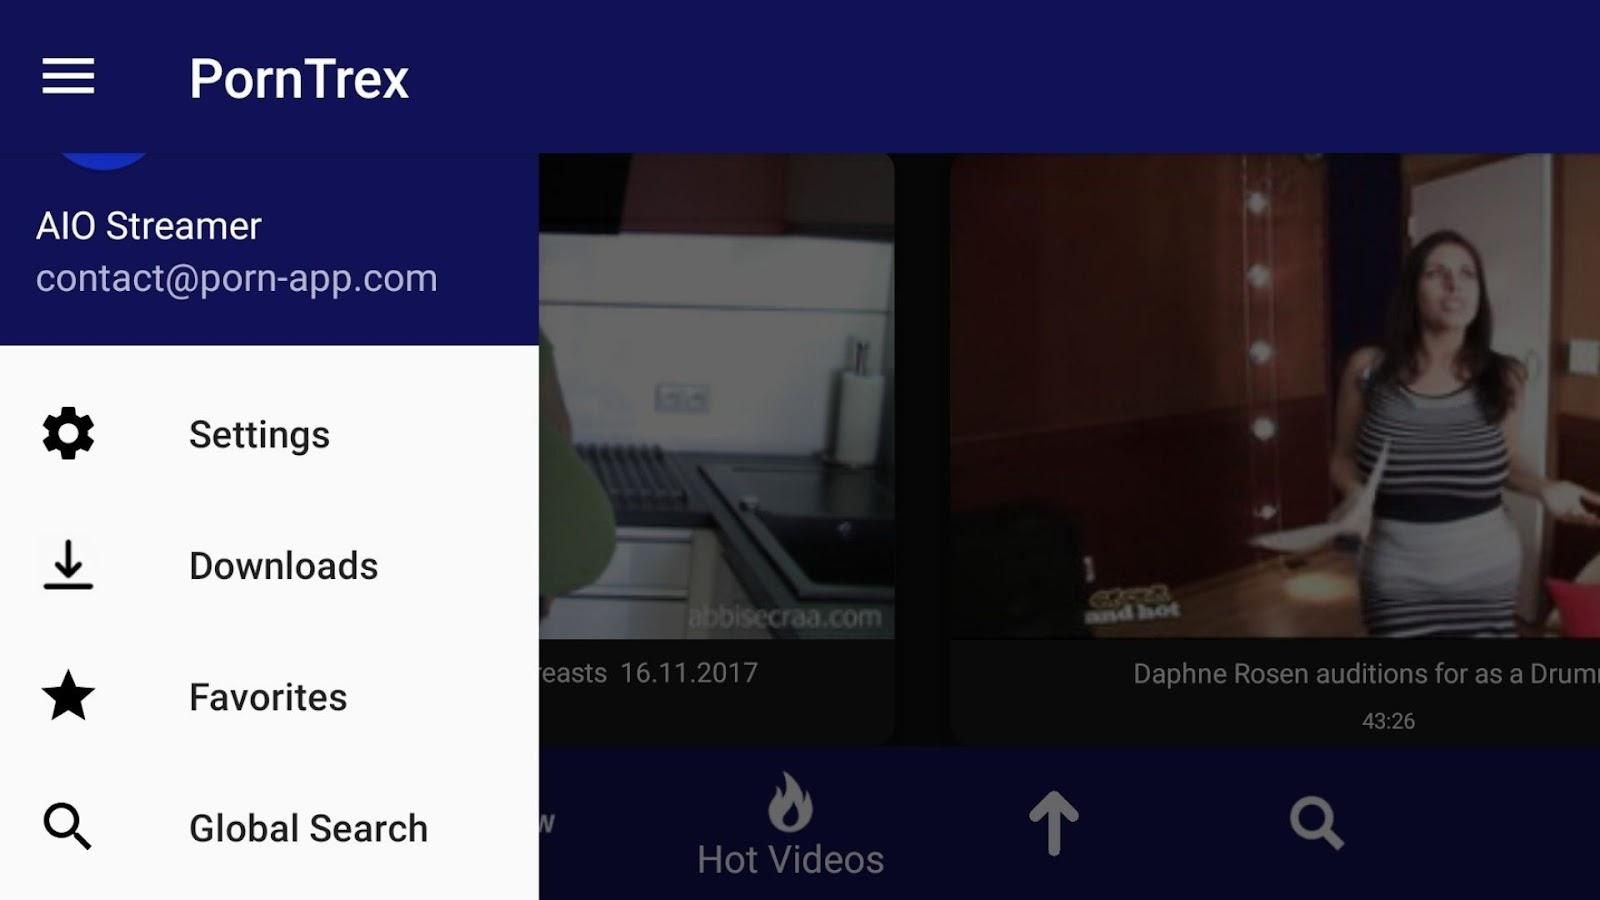 Hq Porn App Dowlod - Best Porn App to Try in 2023 - The Top Picks-LDPlayer's Choice-LDPlayer